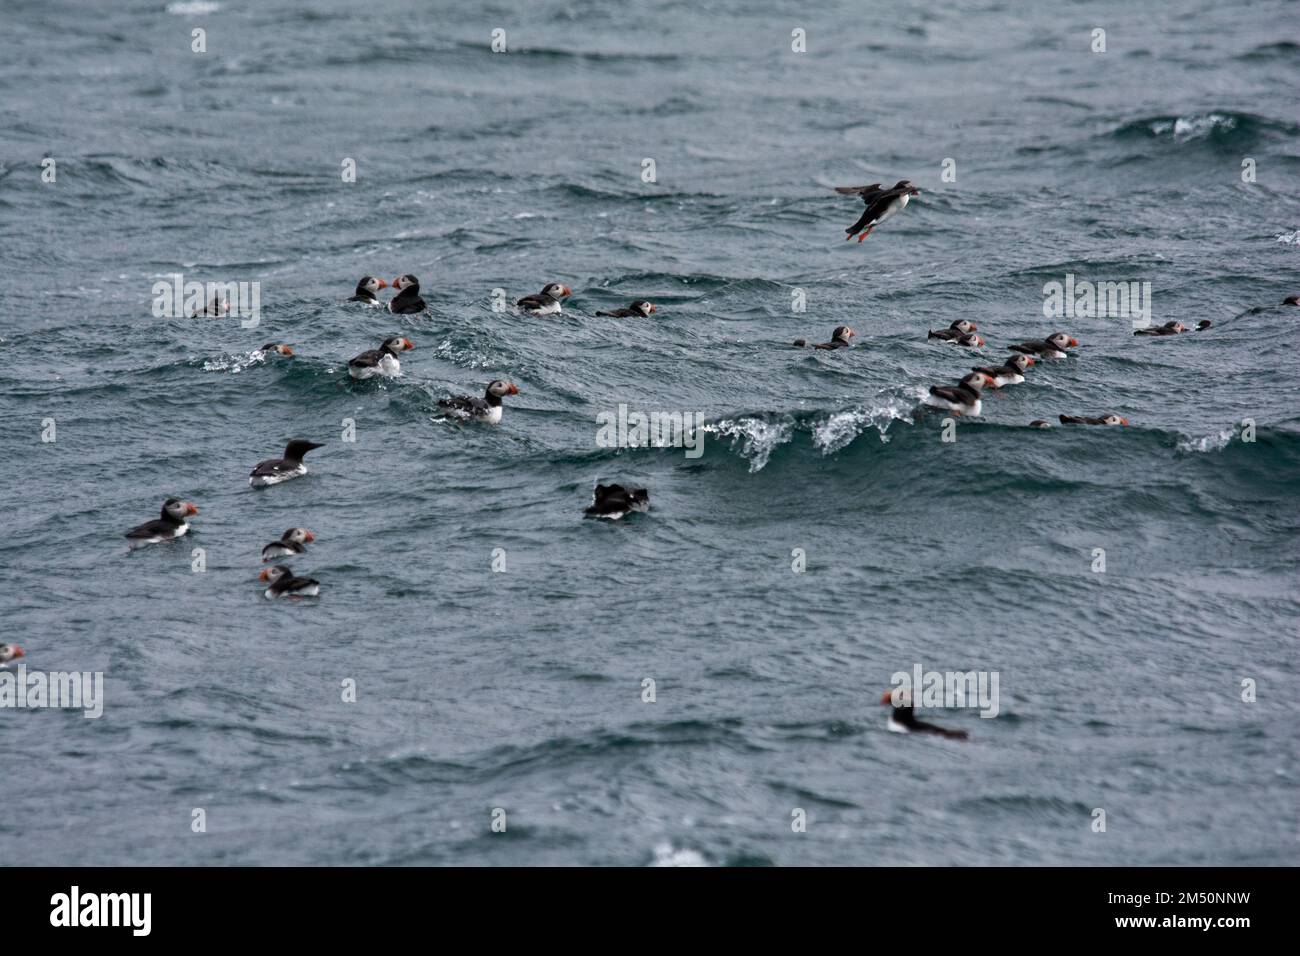 Atlantic Puffins swimming on the waves of Norwegian Sea off the coast of Andøya Island in the Norwegian Sea. Stock Photo